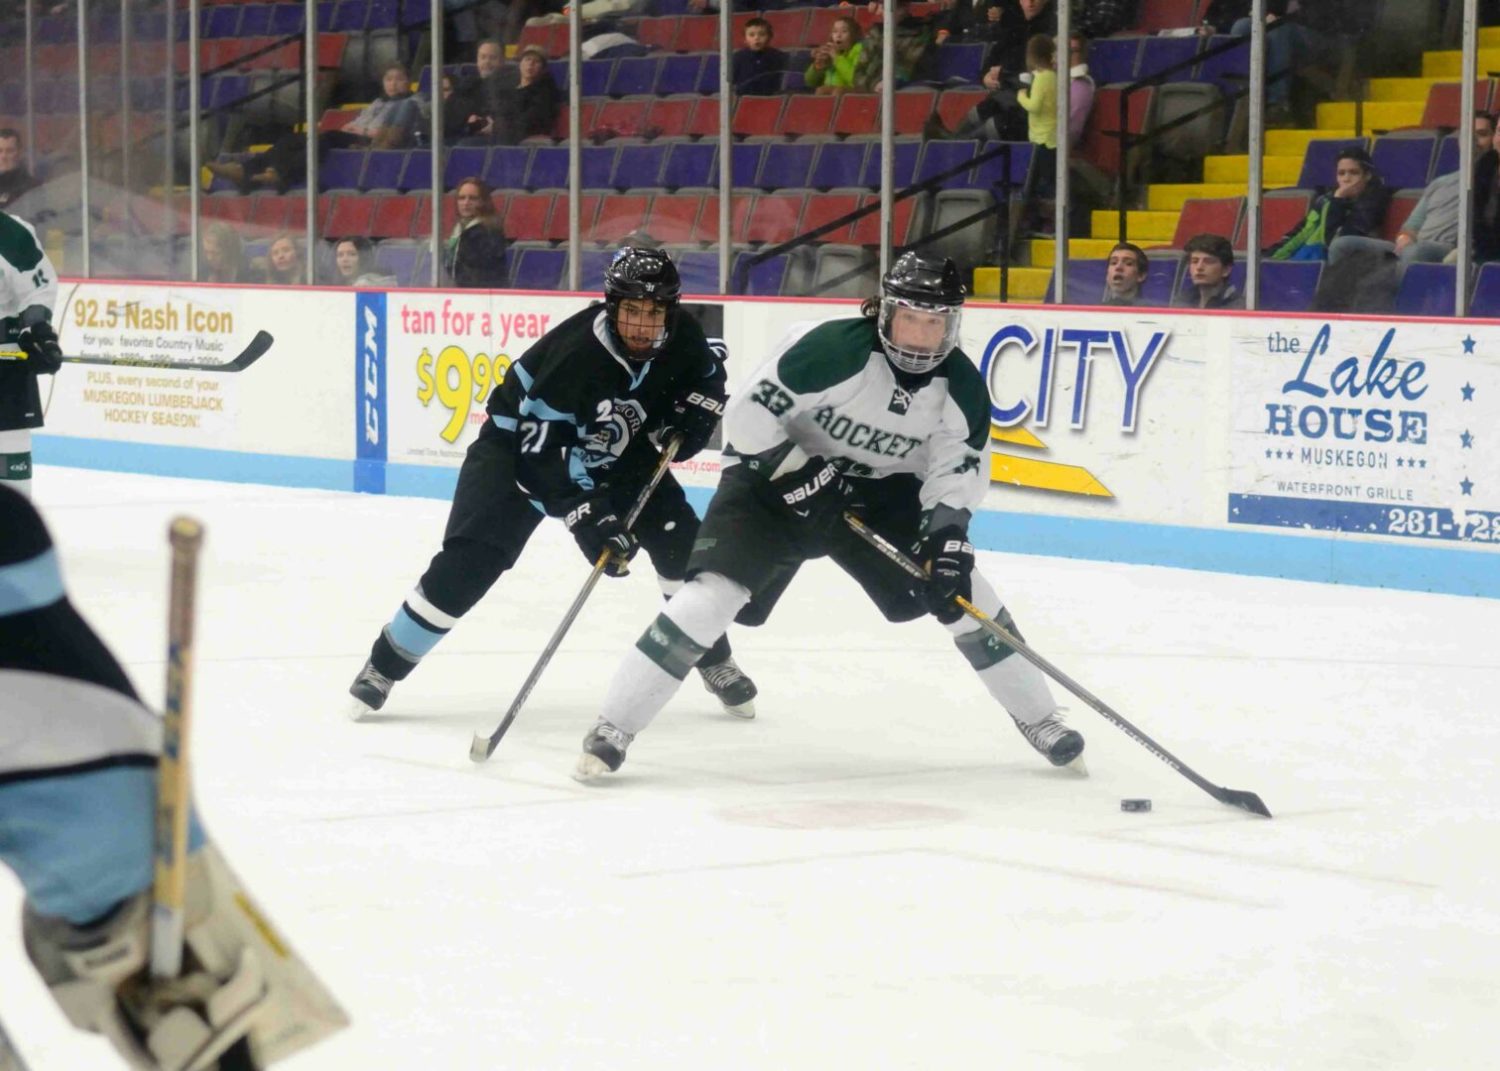 Reeths-Puffer hockey team avenges two earlier losses to Mona Shores with a 5-2 victory in Division 2 regionals [VIDEO]